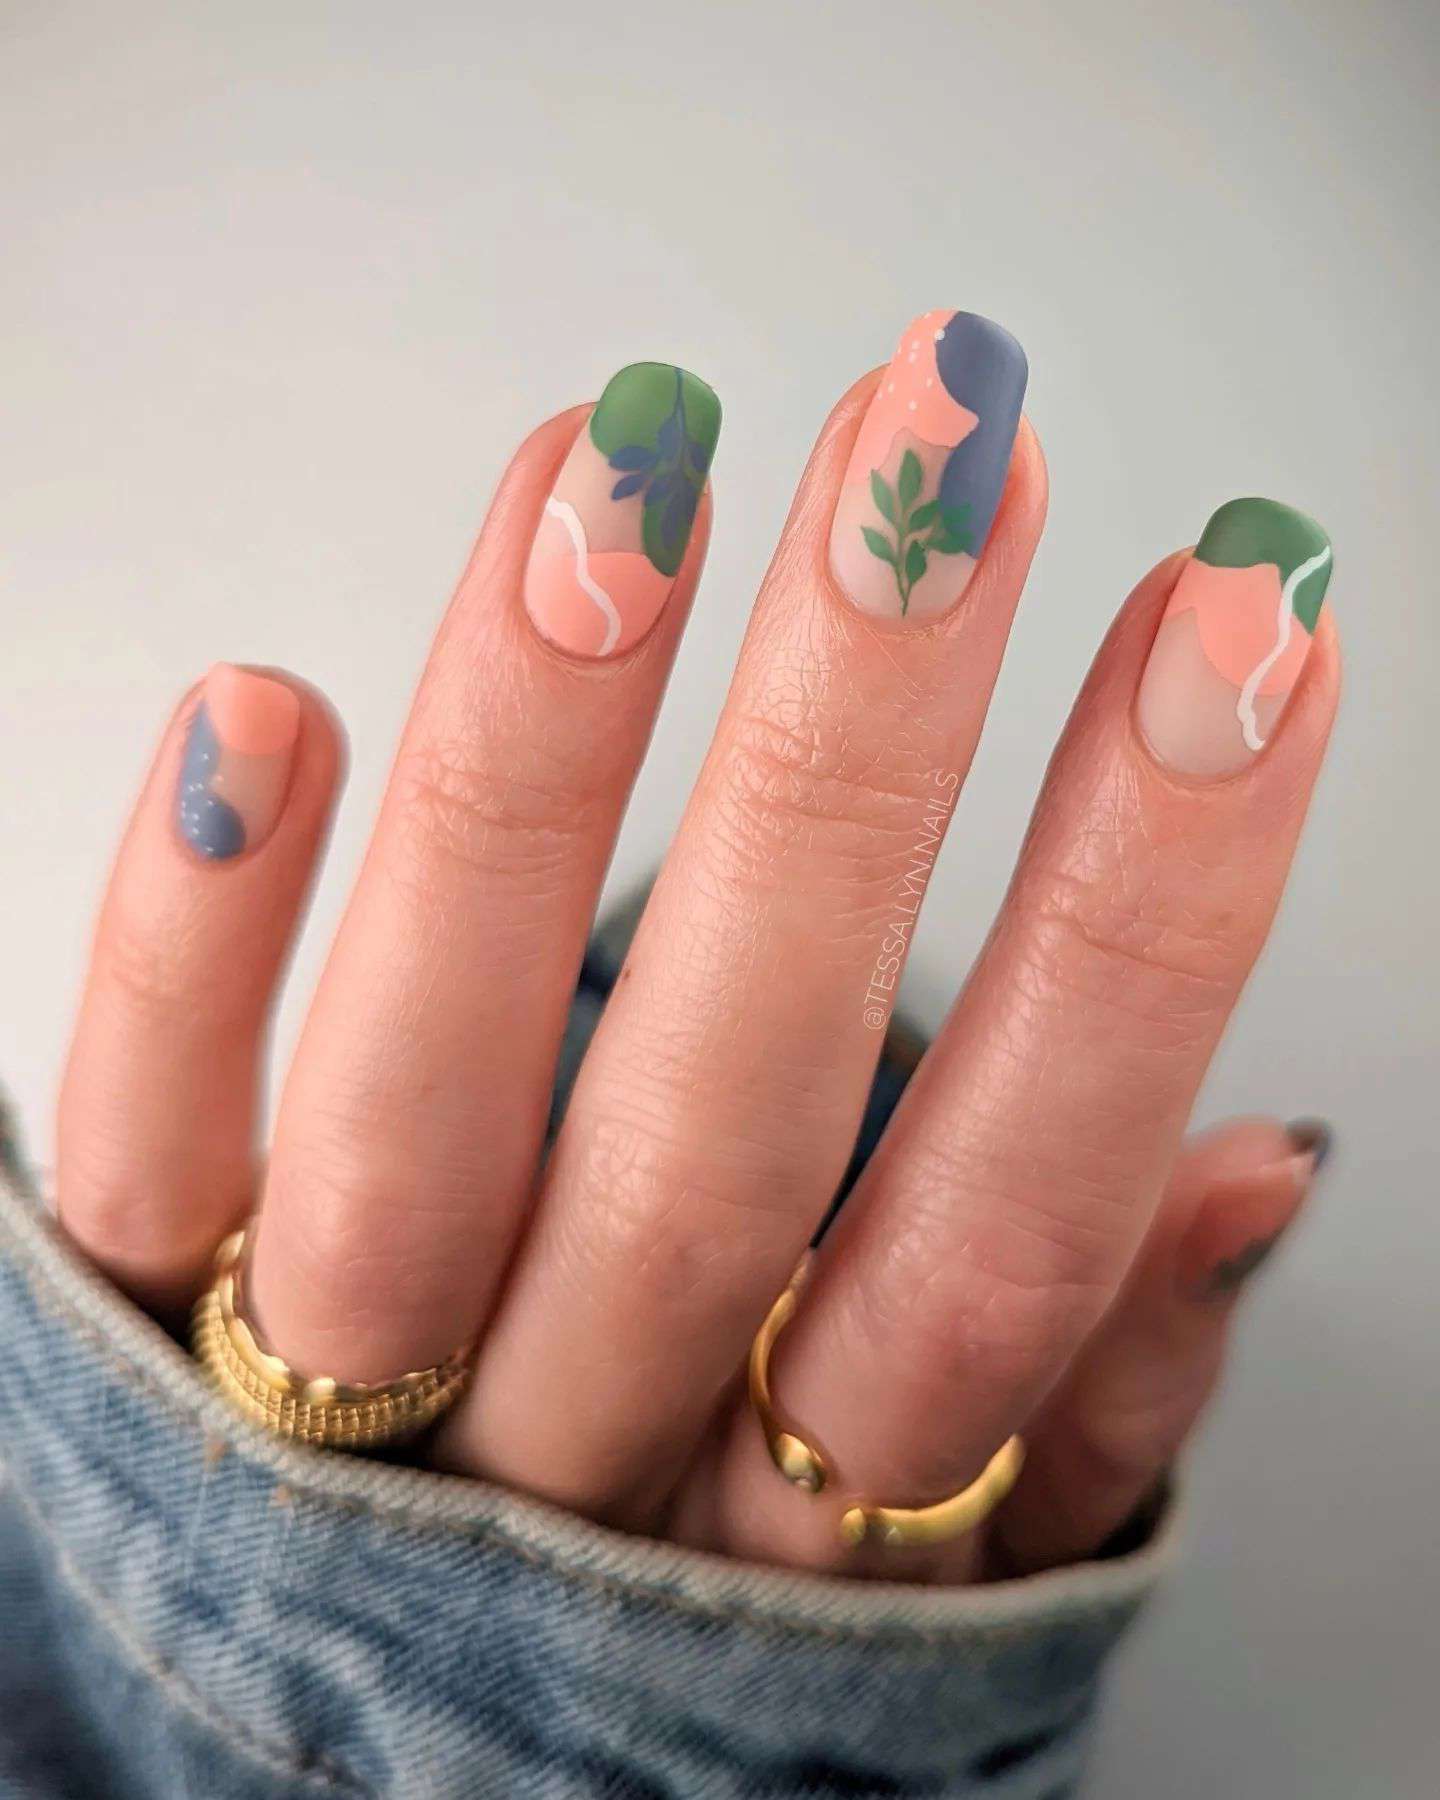 100+ Must Try Fall Nail Art Designs And Nail Ideas images 80